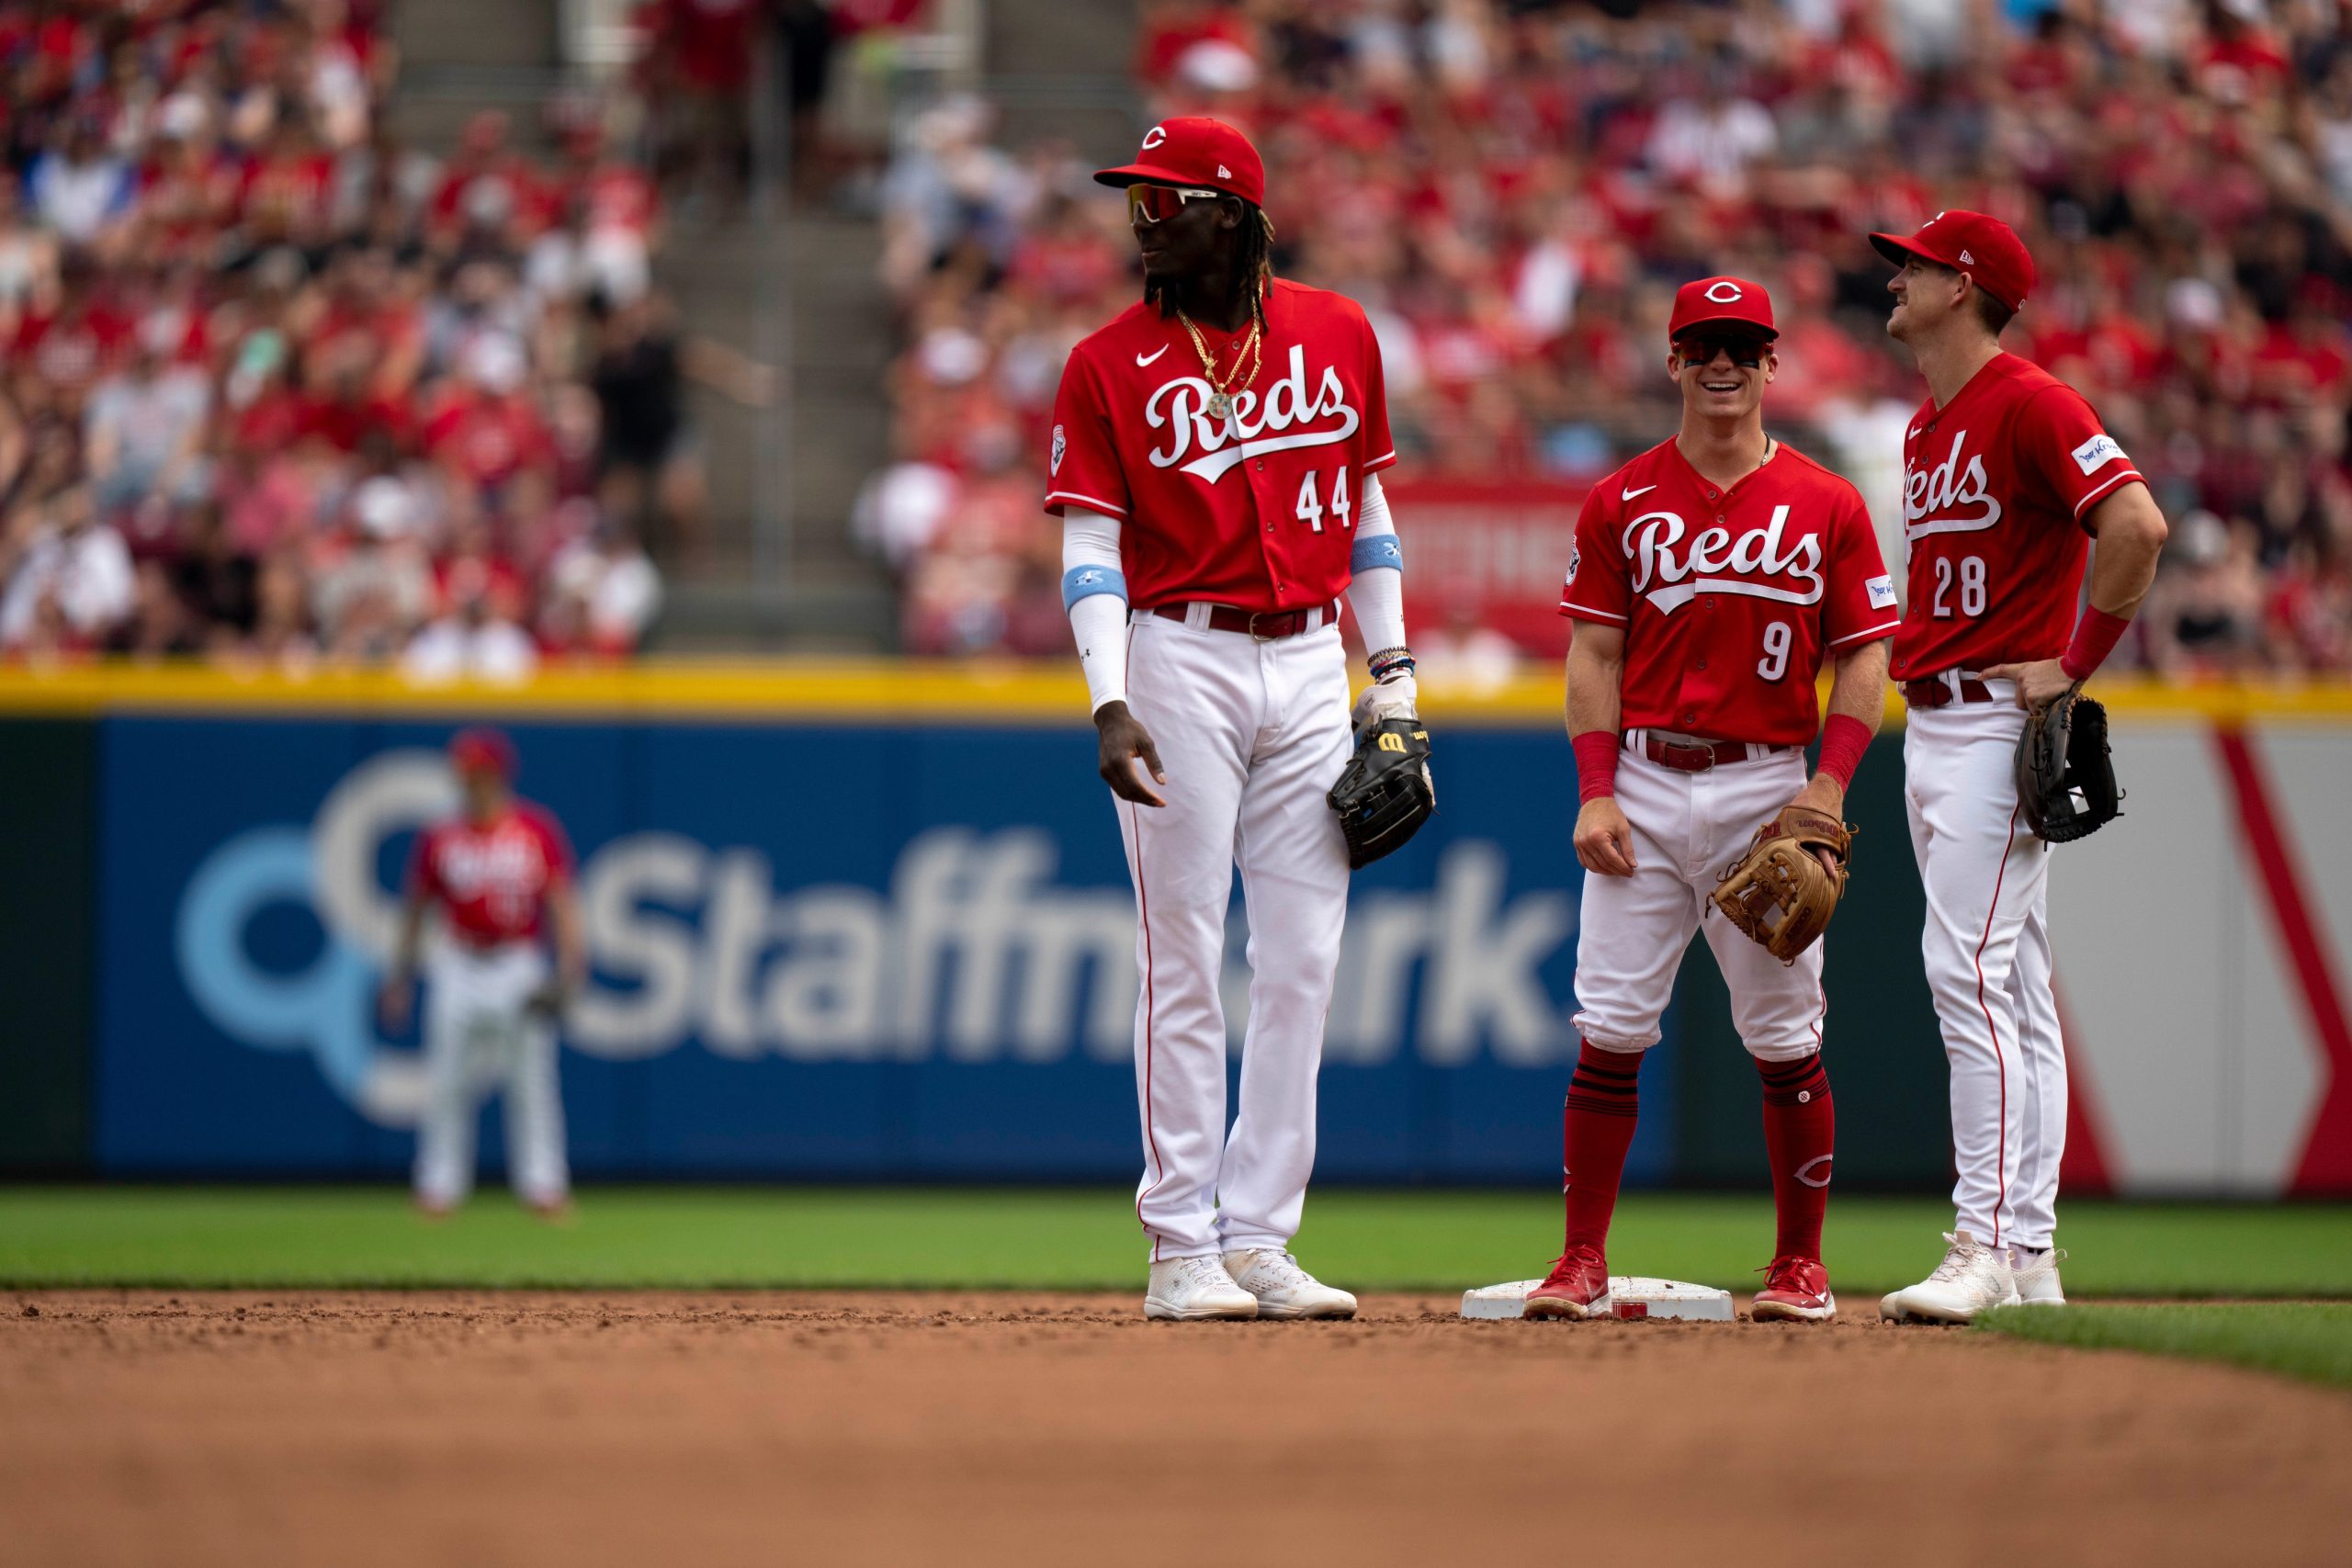 Reds Win Streak Ends With A Glaring Need For Starting Pitching